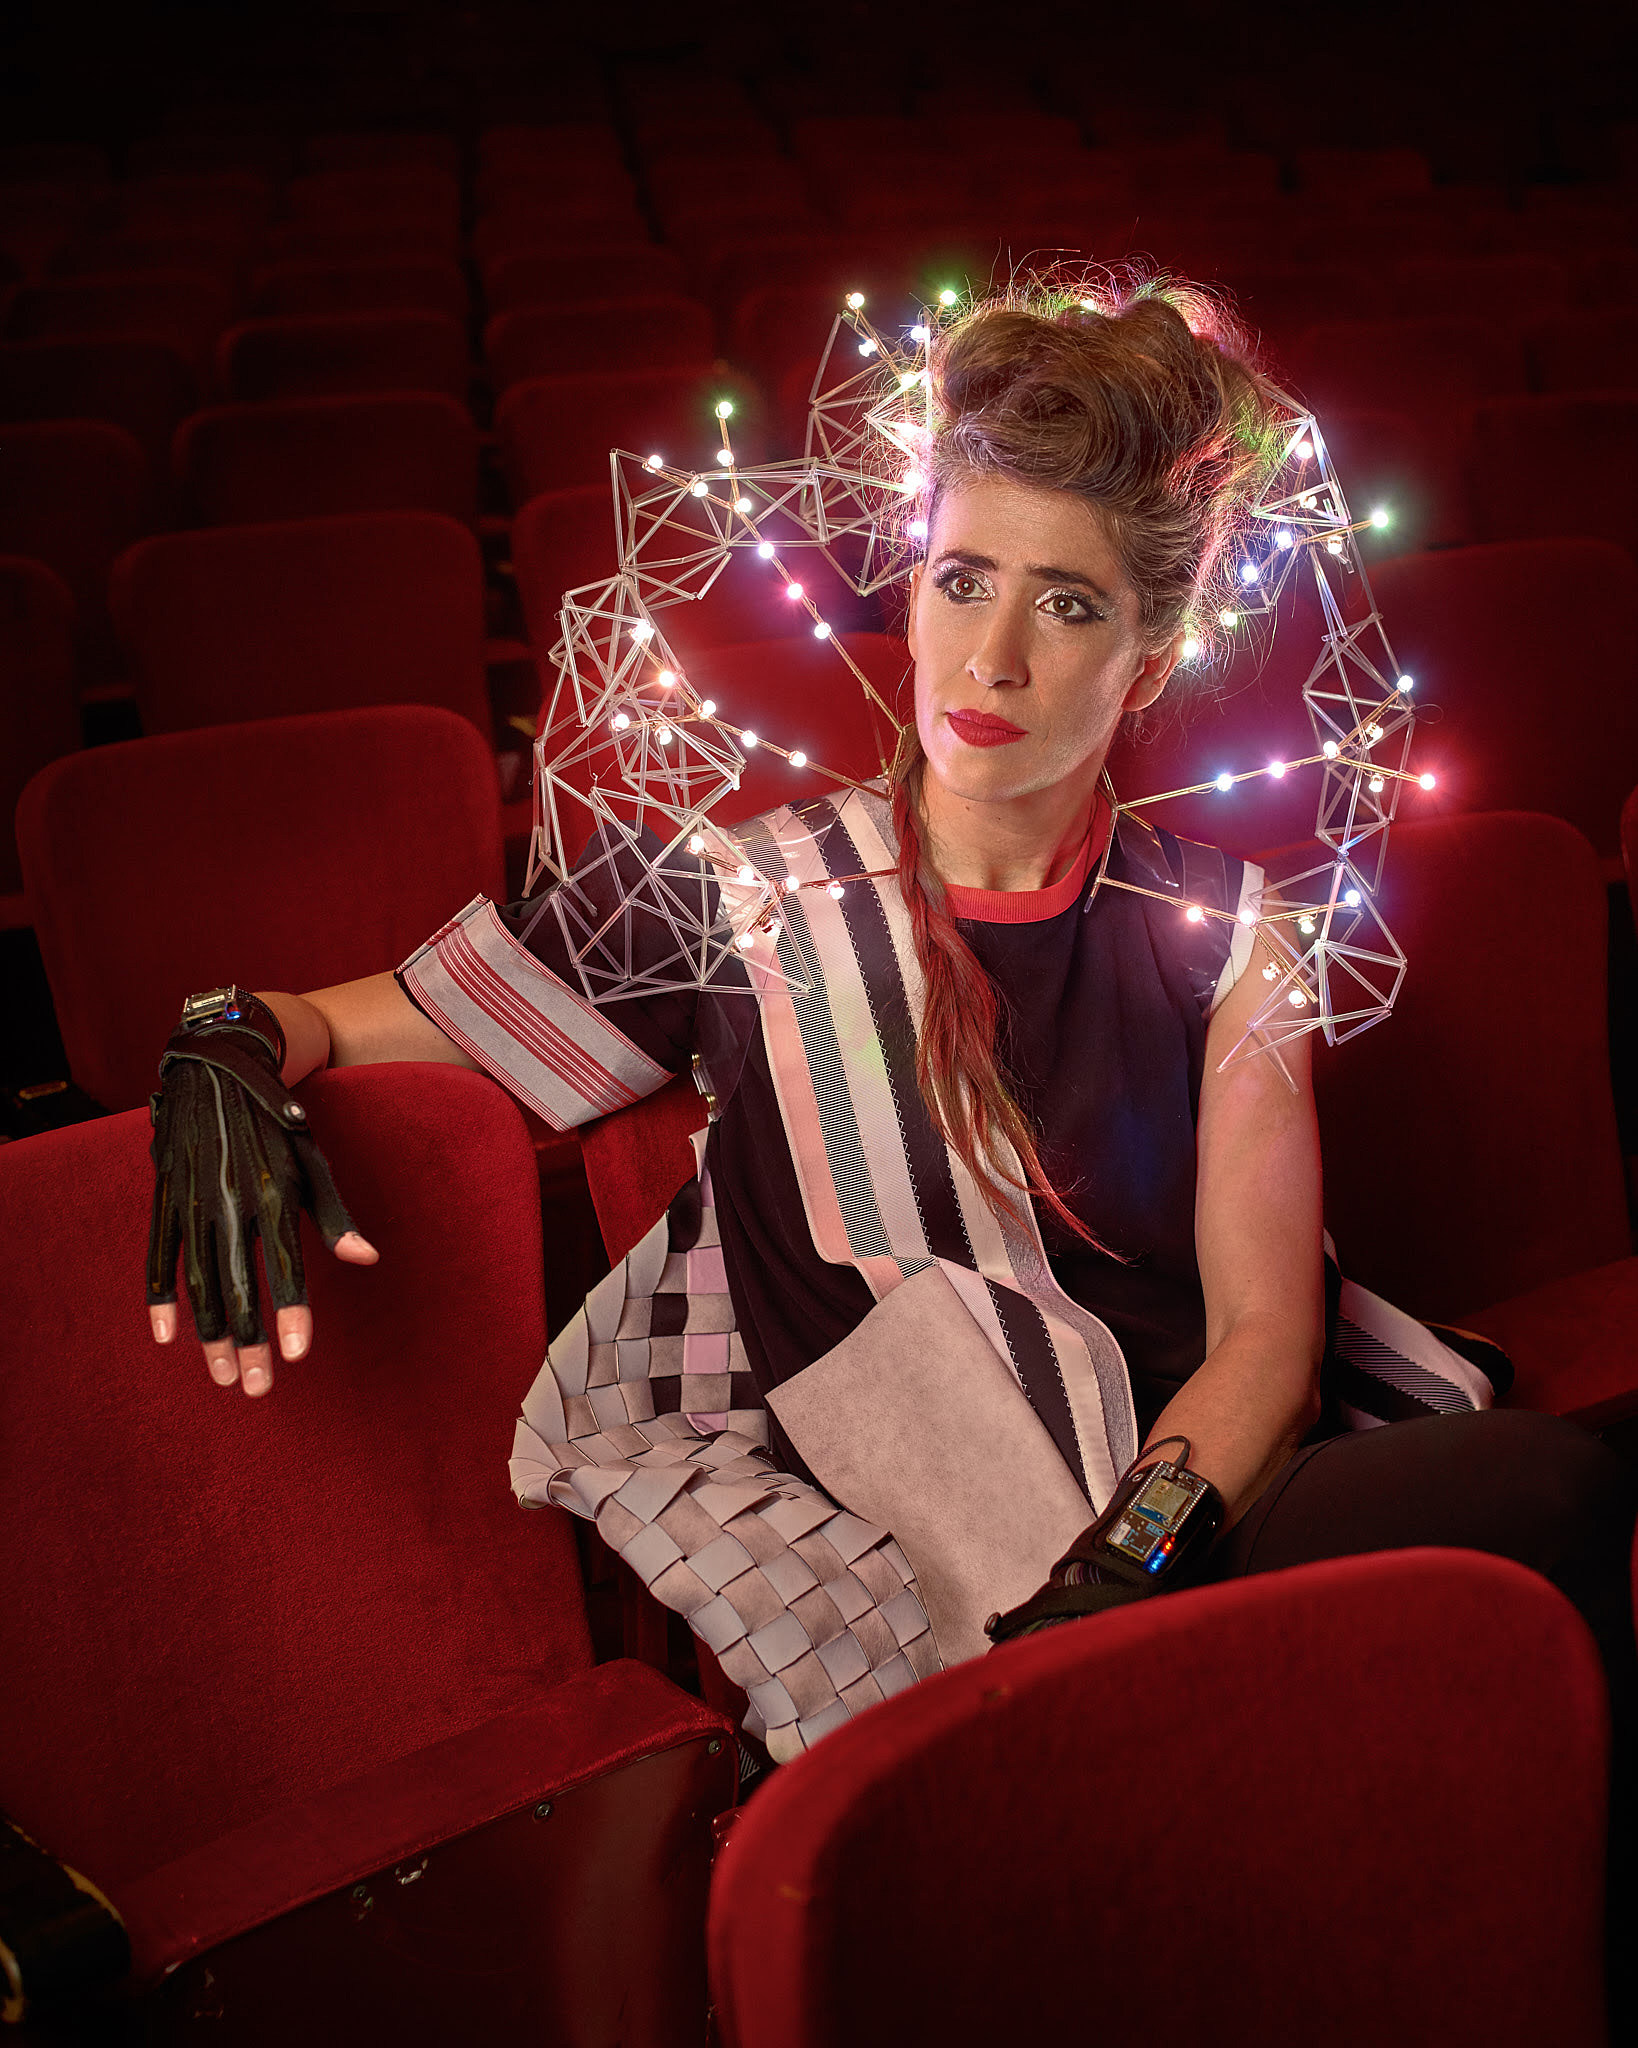 Imogen Heap Releasing New Album Of Collaborations Shares The Quiet With Baths